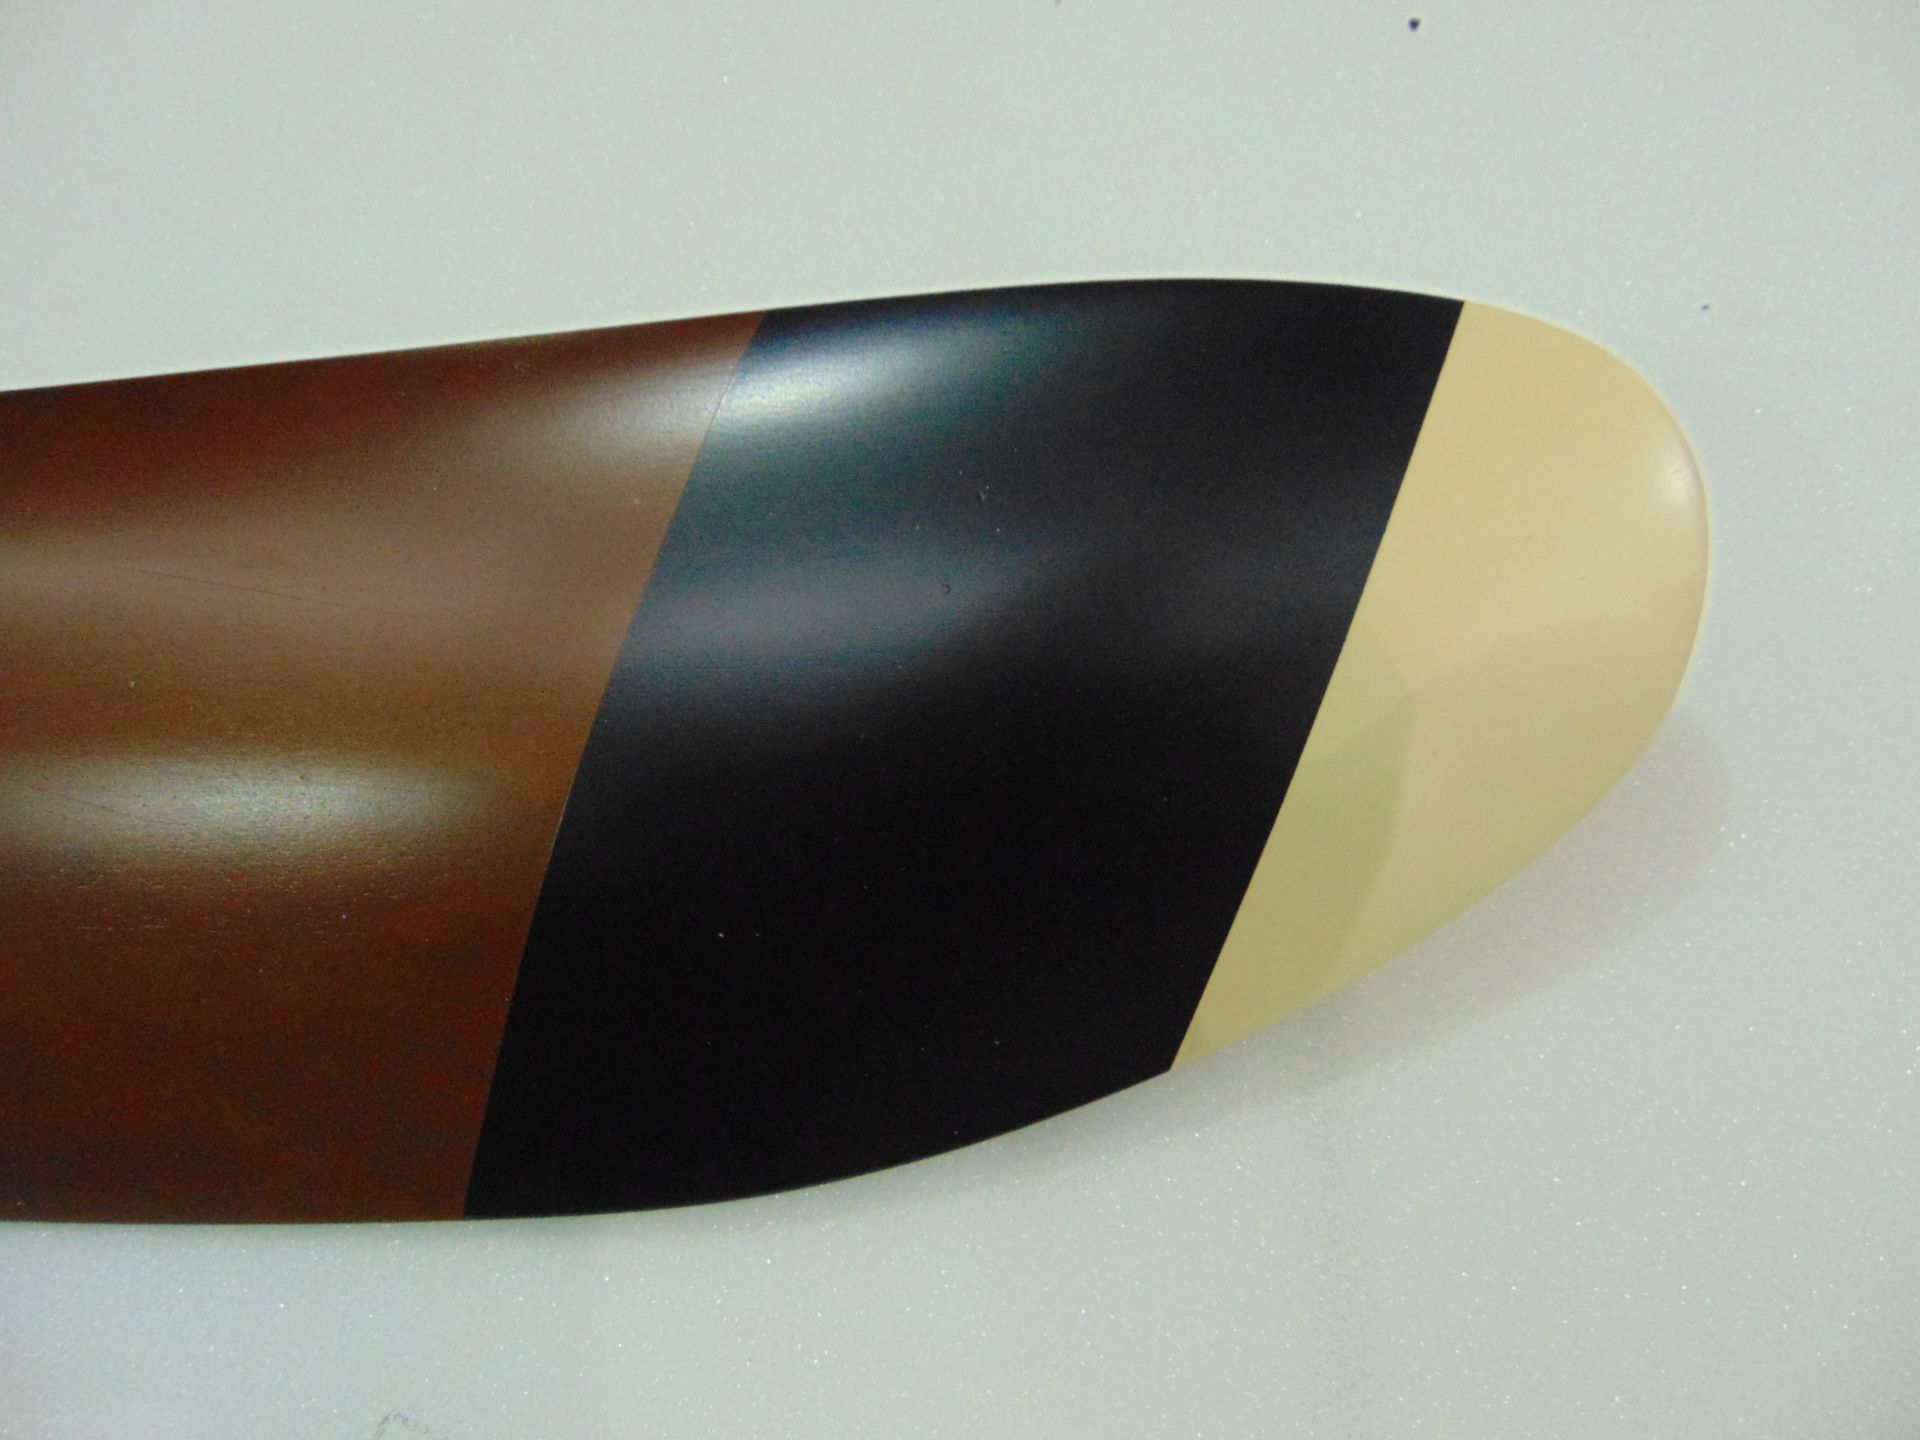 Full Size SOPWITH WWI AIRCRAFT PROPELLER with black/ivory Tips Repro. 186 x 8 x 15 cms - Image 5 of 7